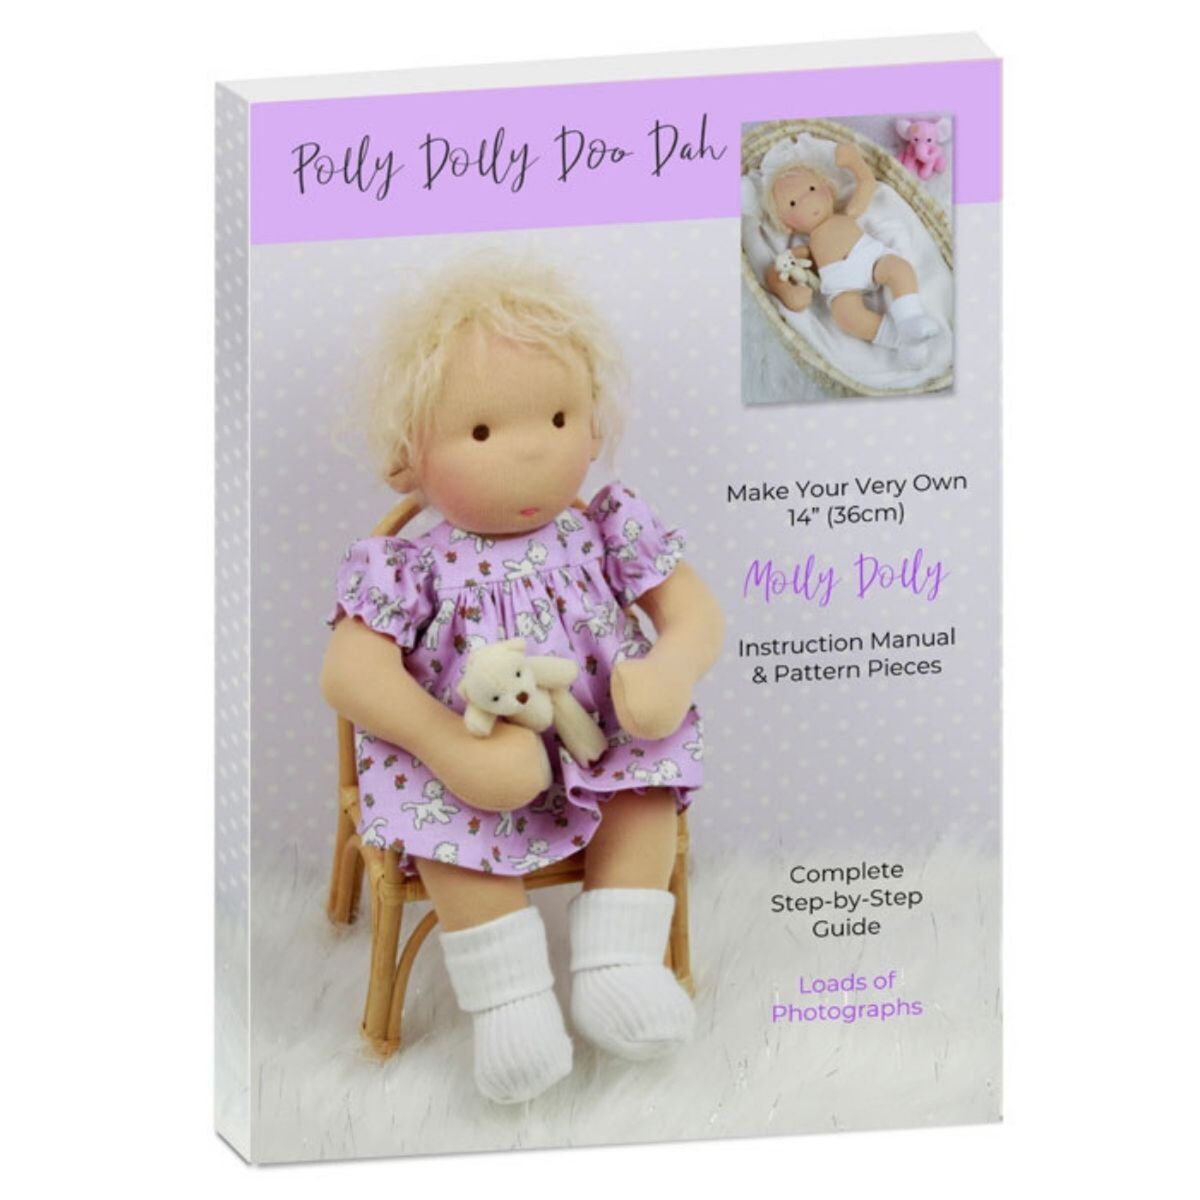 Molly Dolly Instruction Manual Pattern Pieces With Free Bonnet